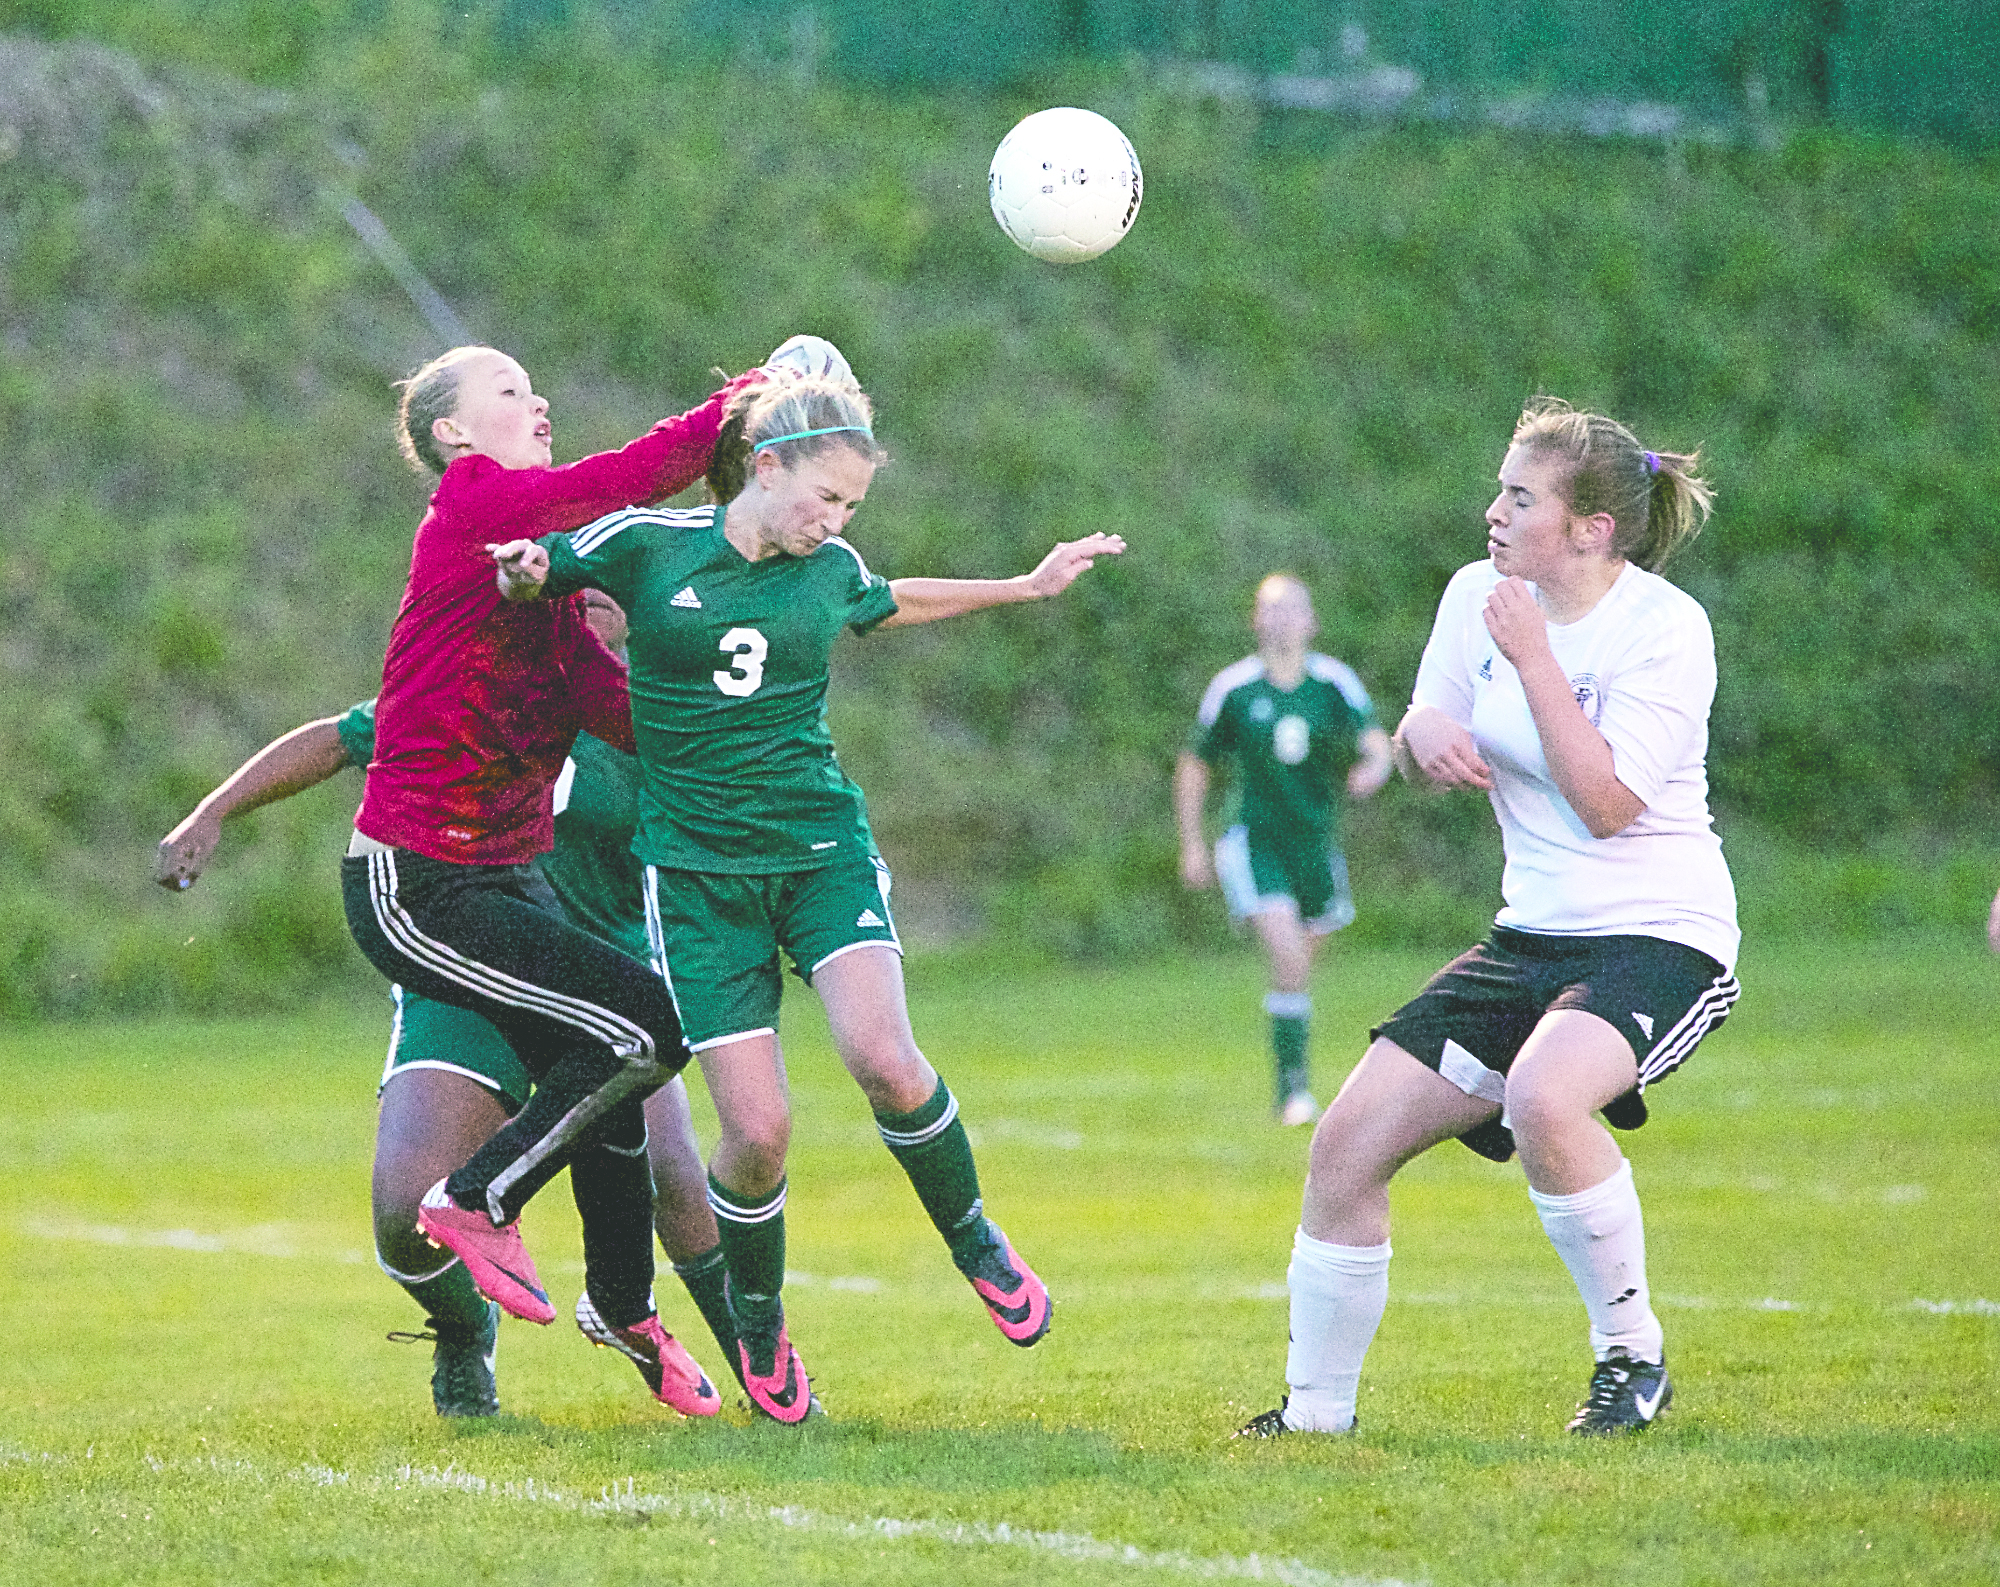 Port Townsend goalkeeper Malia Henderson races out to block a shot by Port Angeles' Madison St. George. Steve Mullensky/for Peninsula Daily News